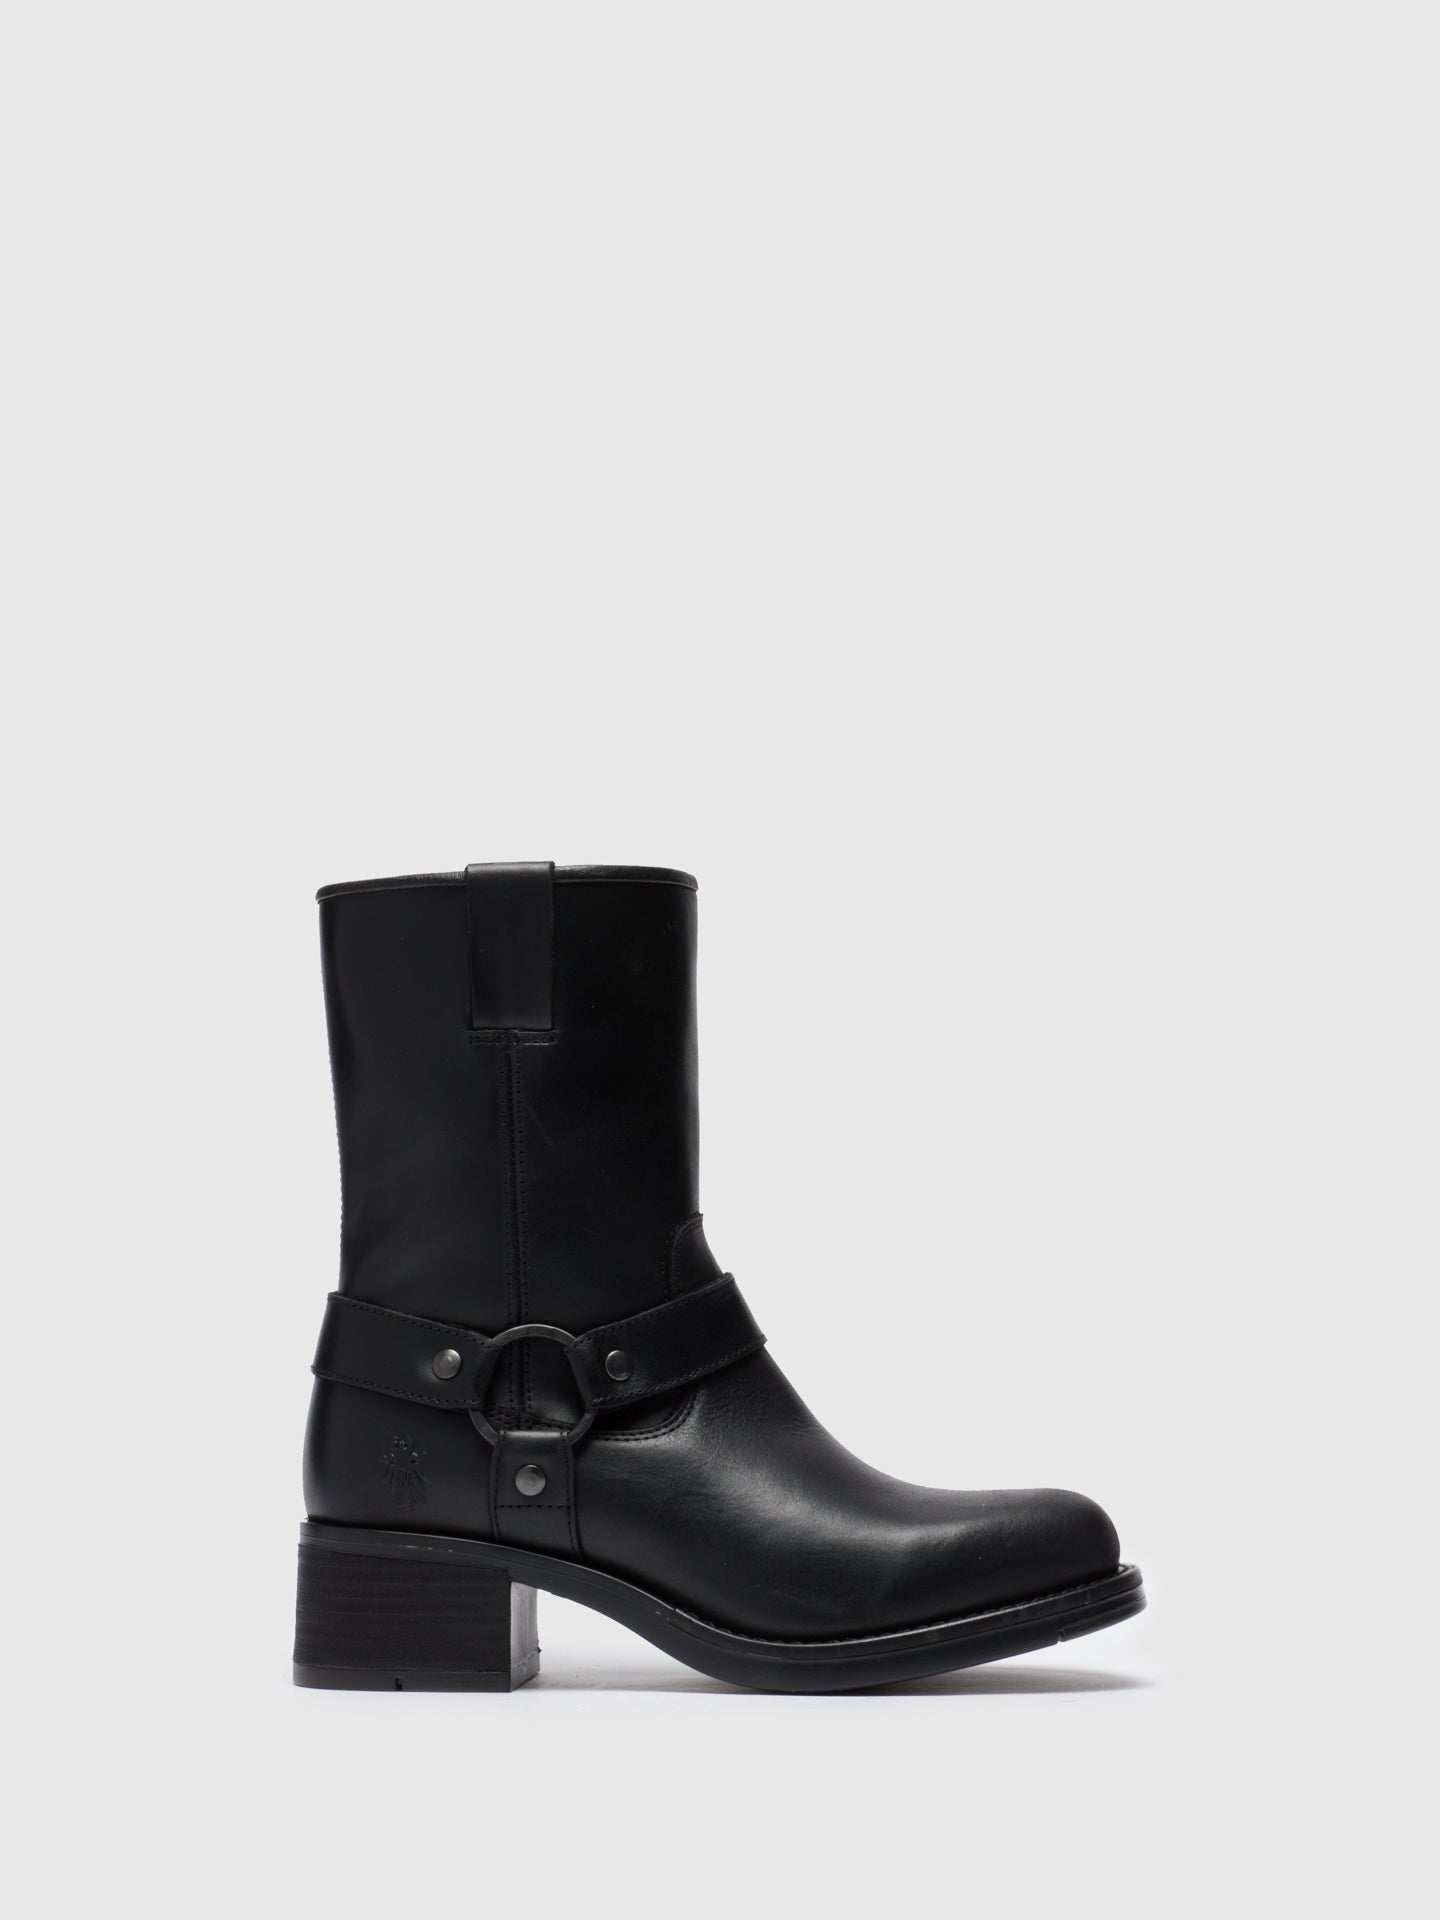 Fly London Black Zip Up Ankle Boots